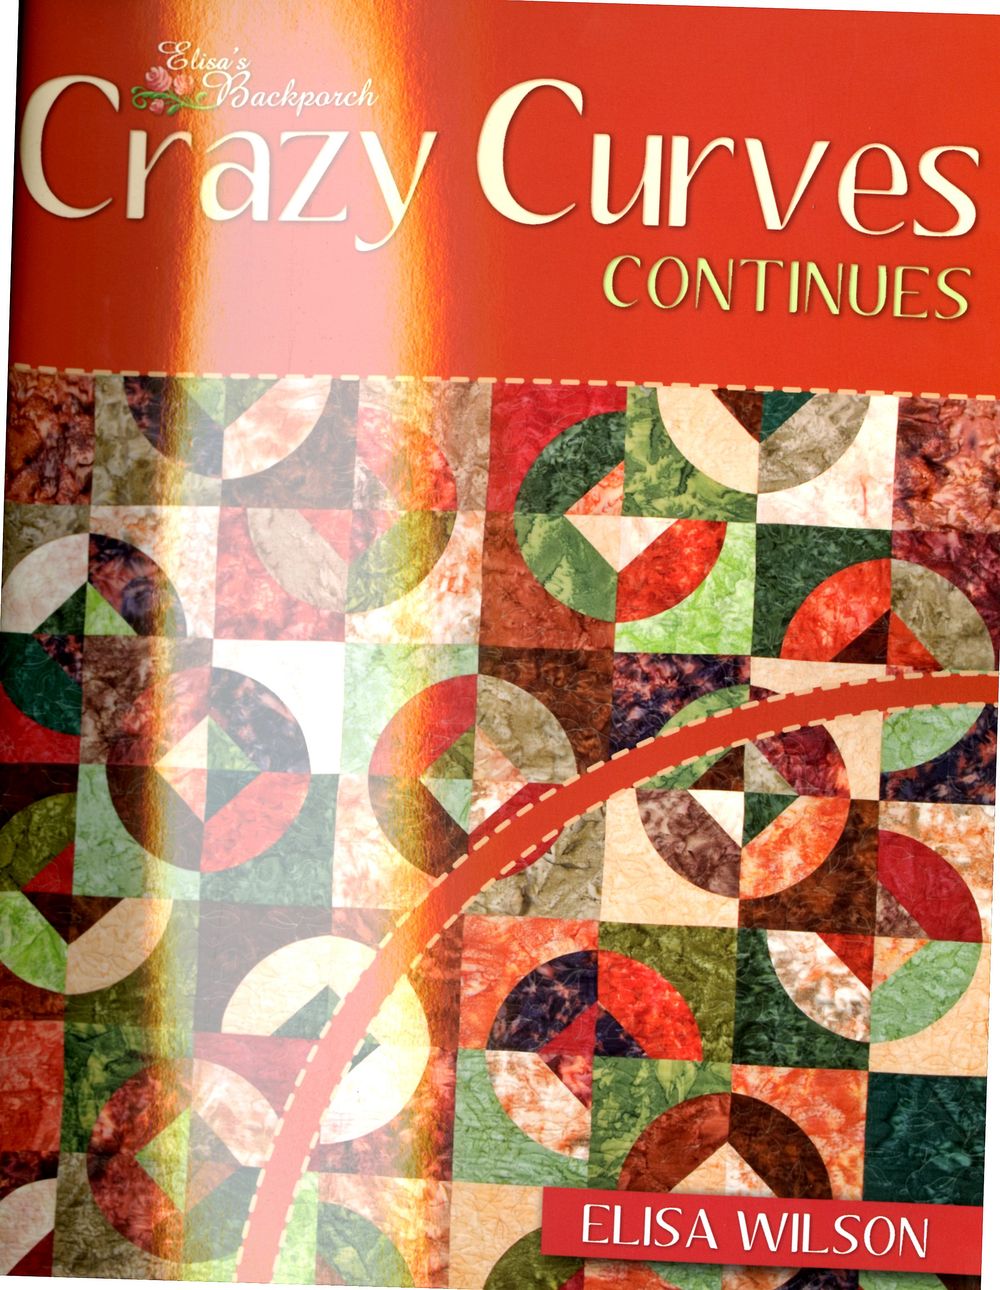 Crazy Curves Continues Quilt Pattern Book By Elisa Wilson of Backporch Design